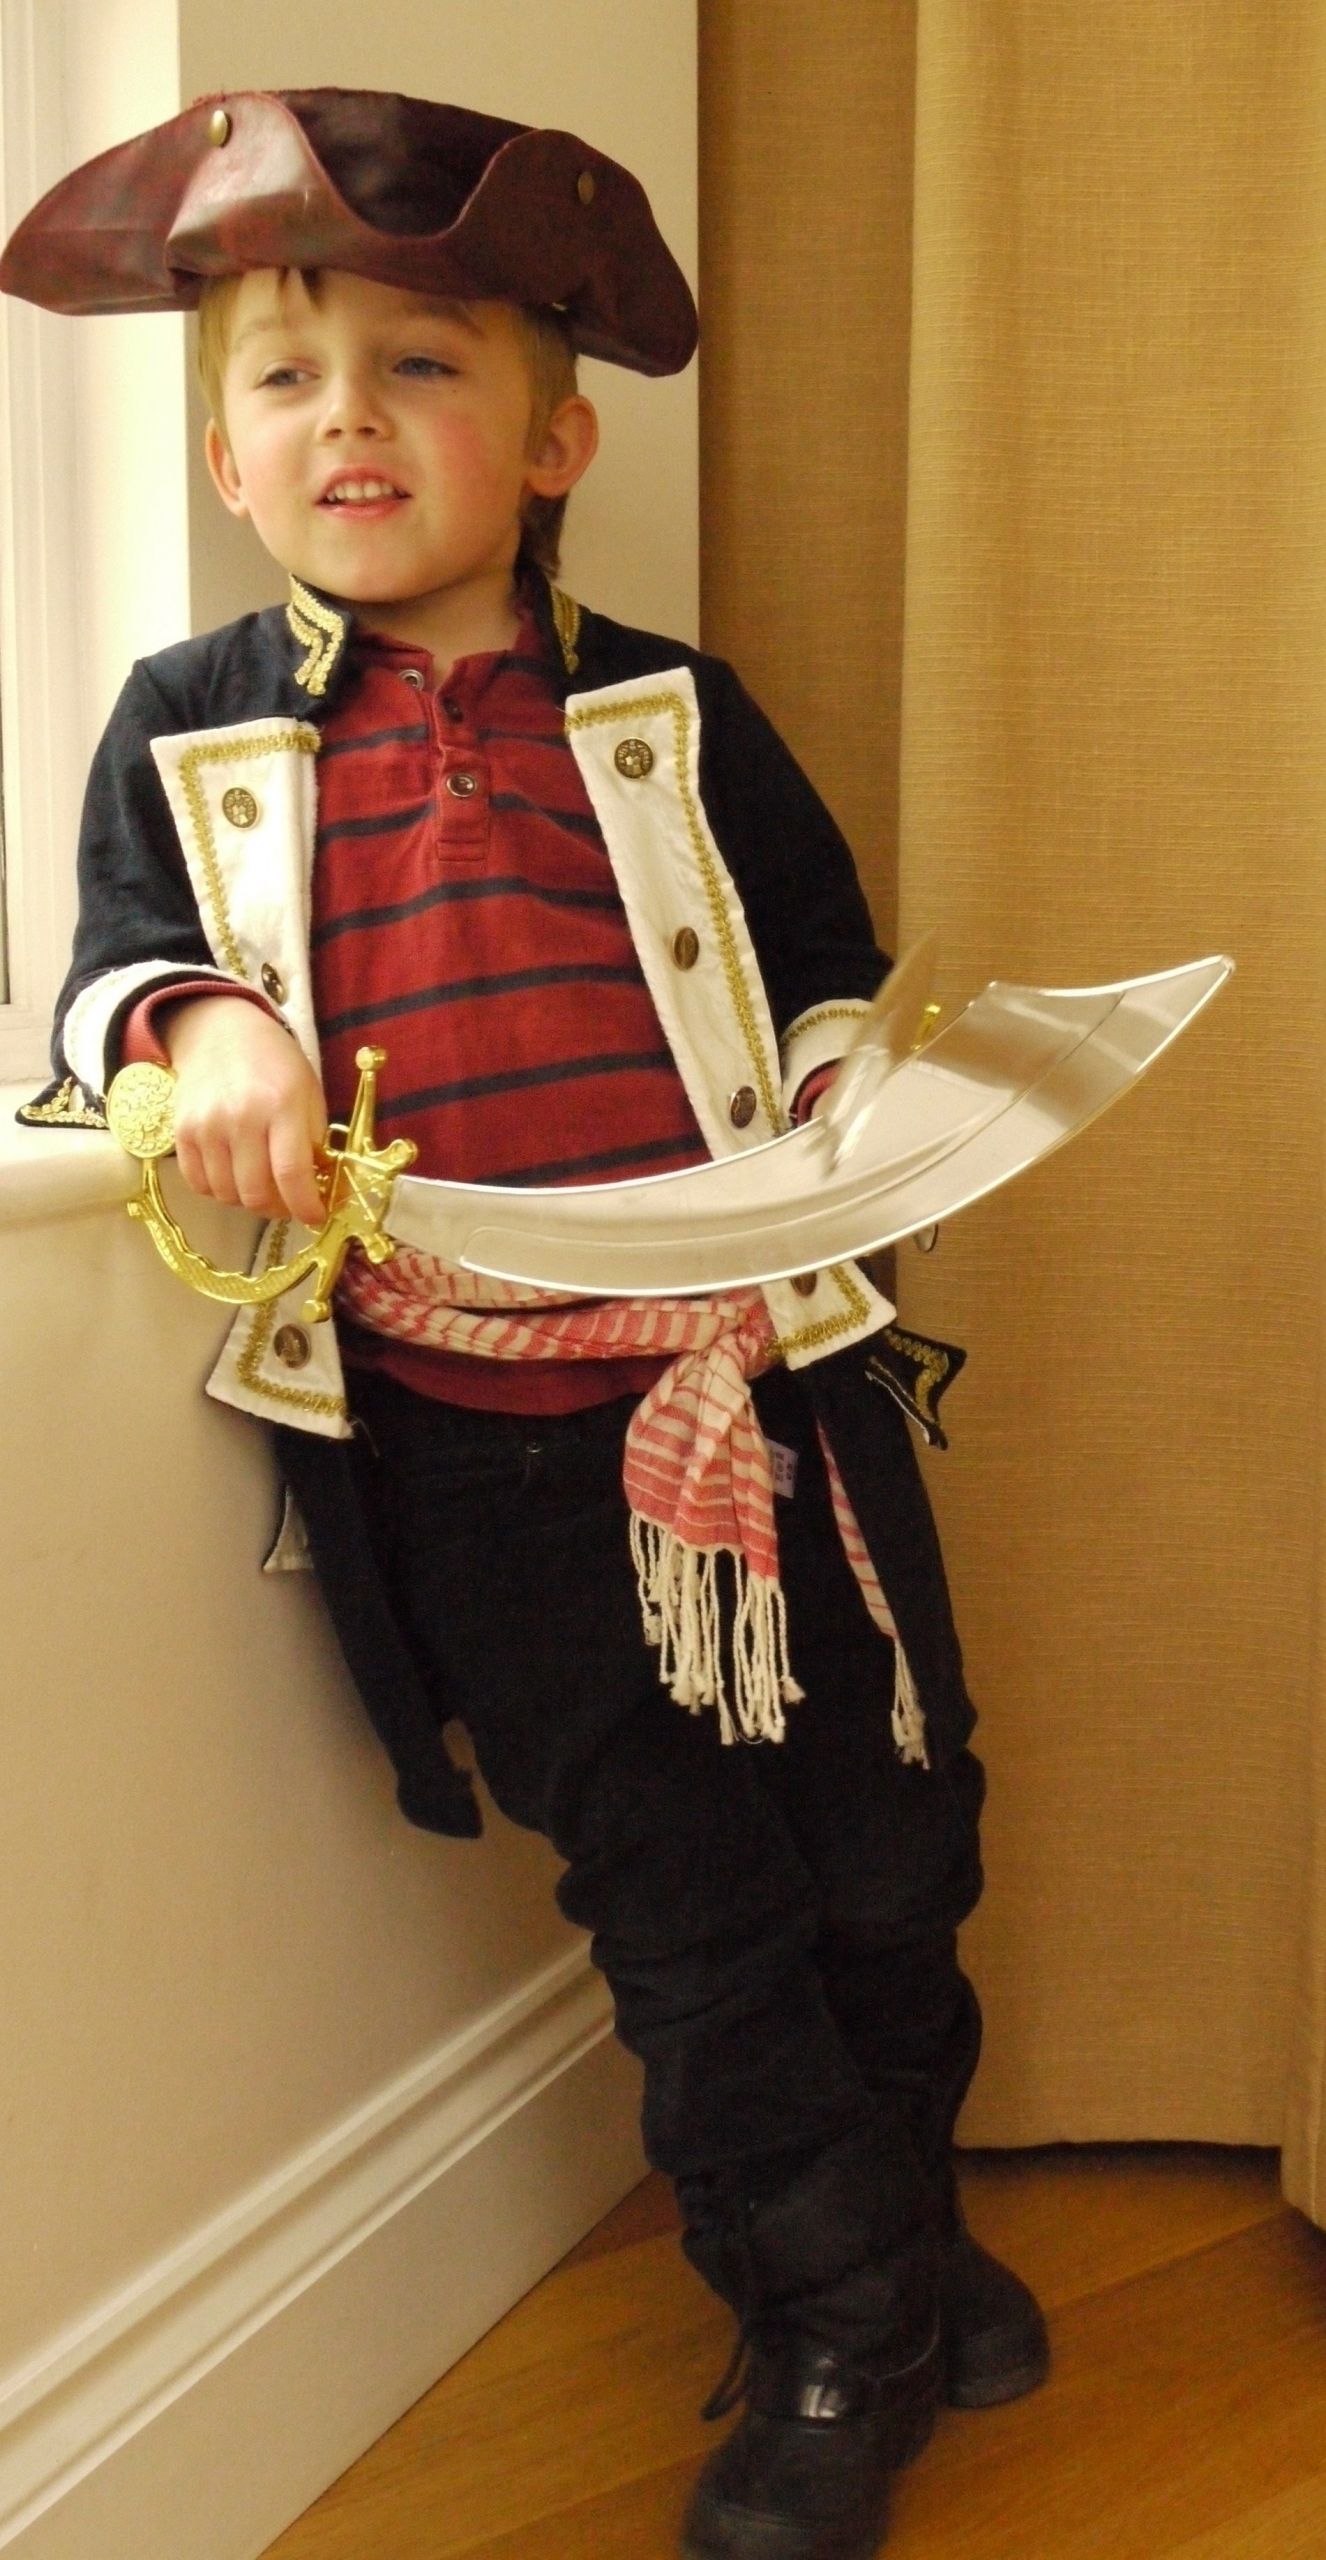 DIY Costume Kids
 10 Attractive Homemade Pirate Costume Ideas For Kids 2019